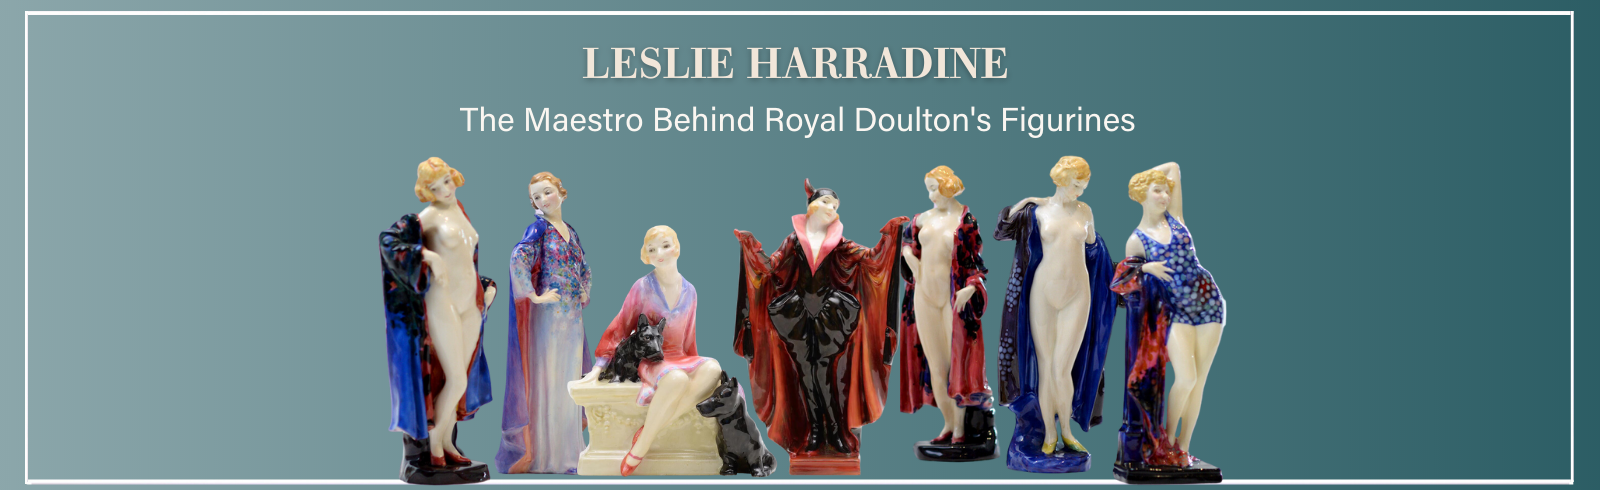 Leslie Harradine: The Independent Maestro Behind Royal Doulton's Figurines